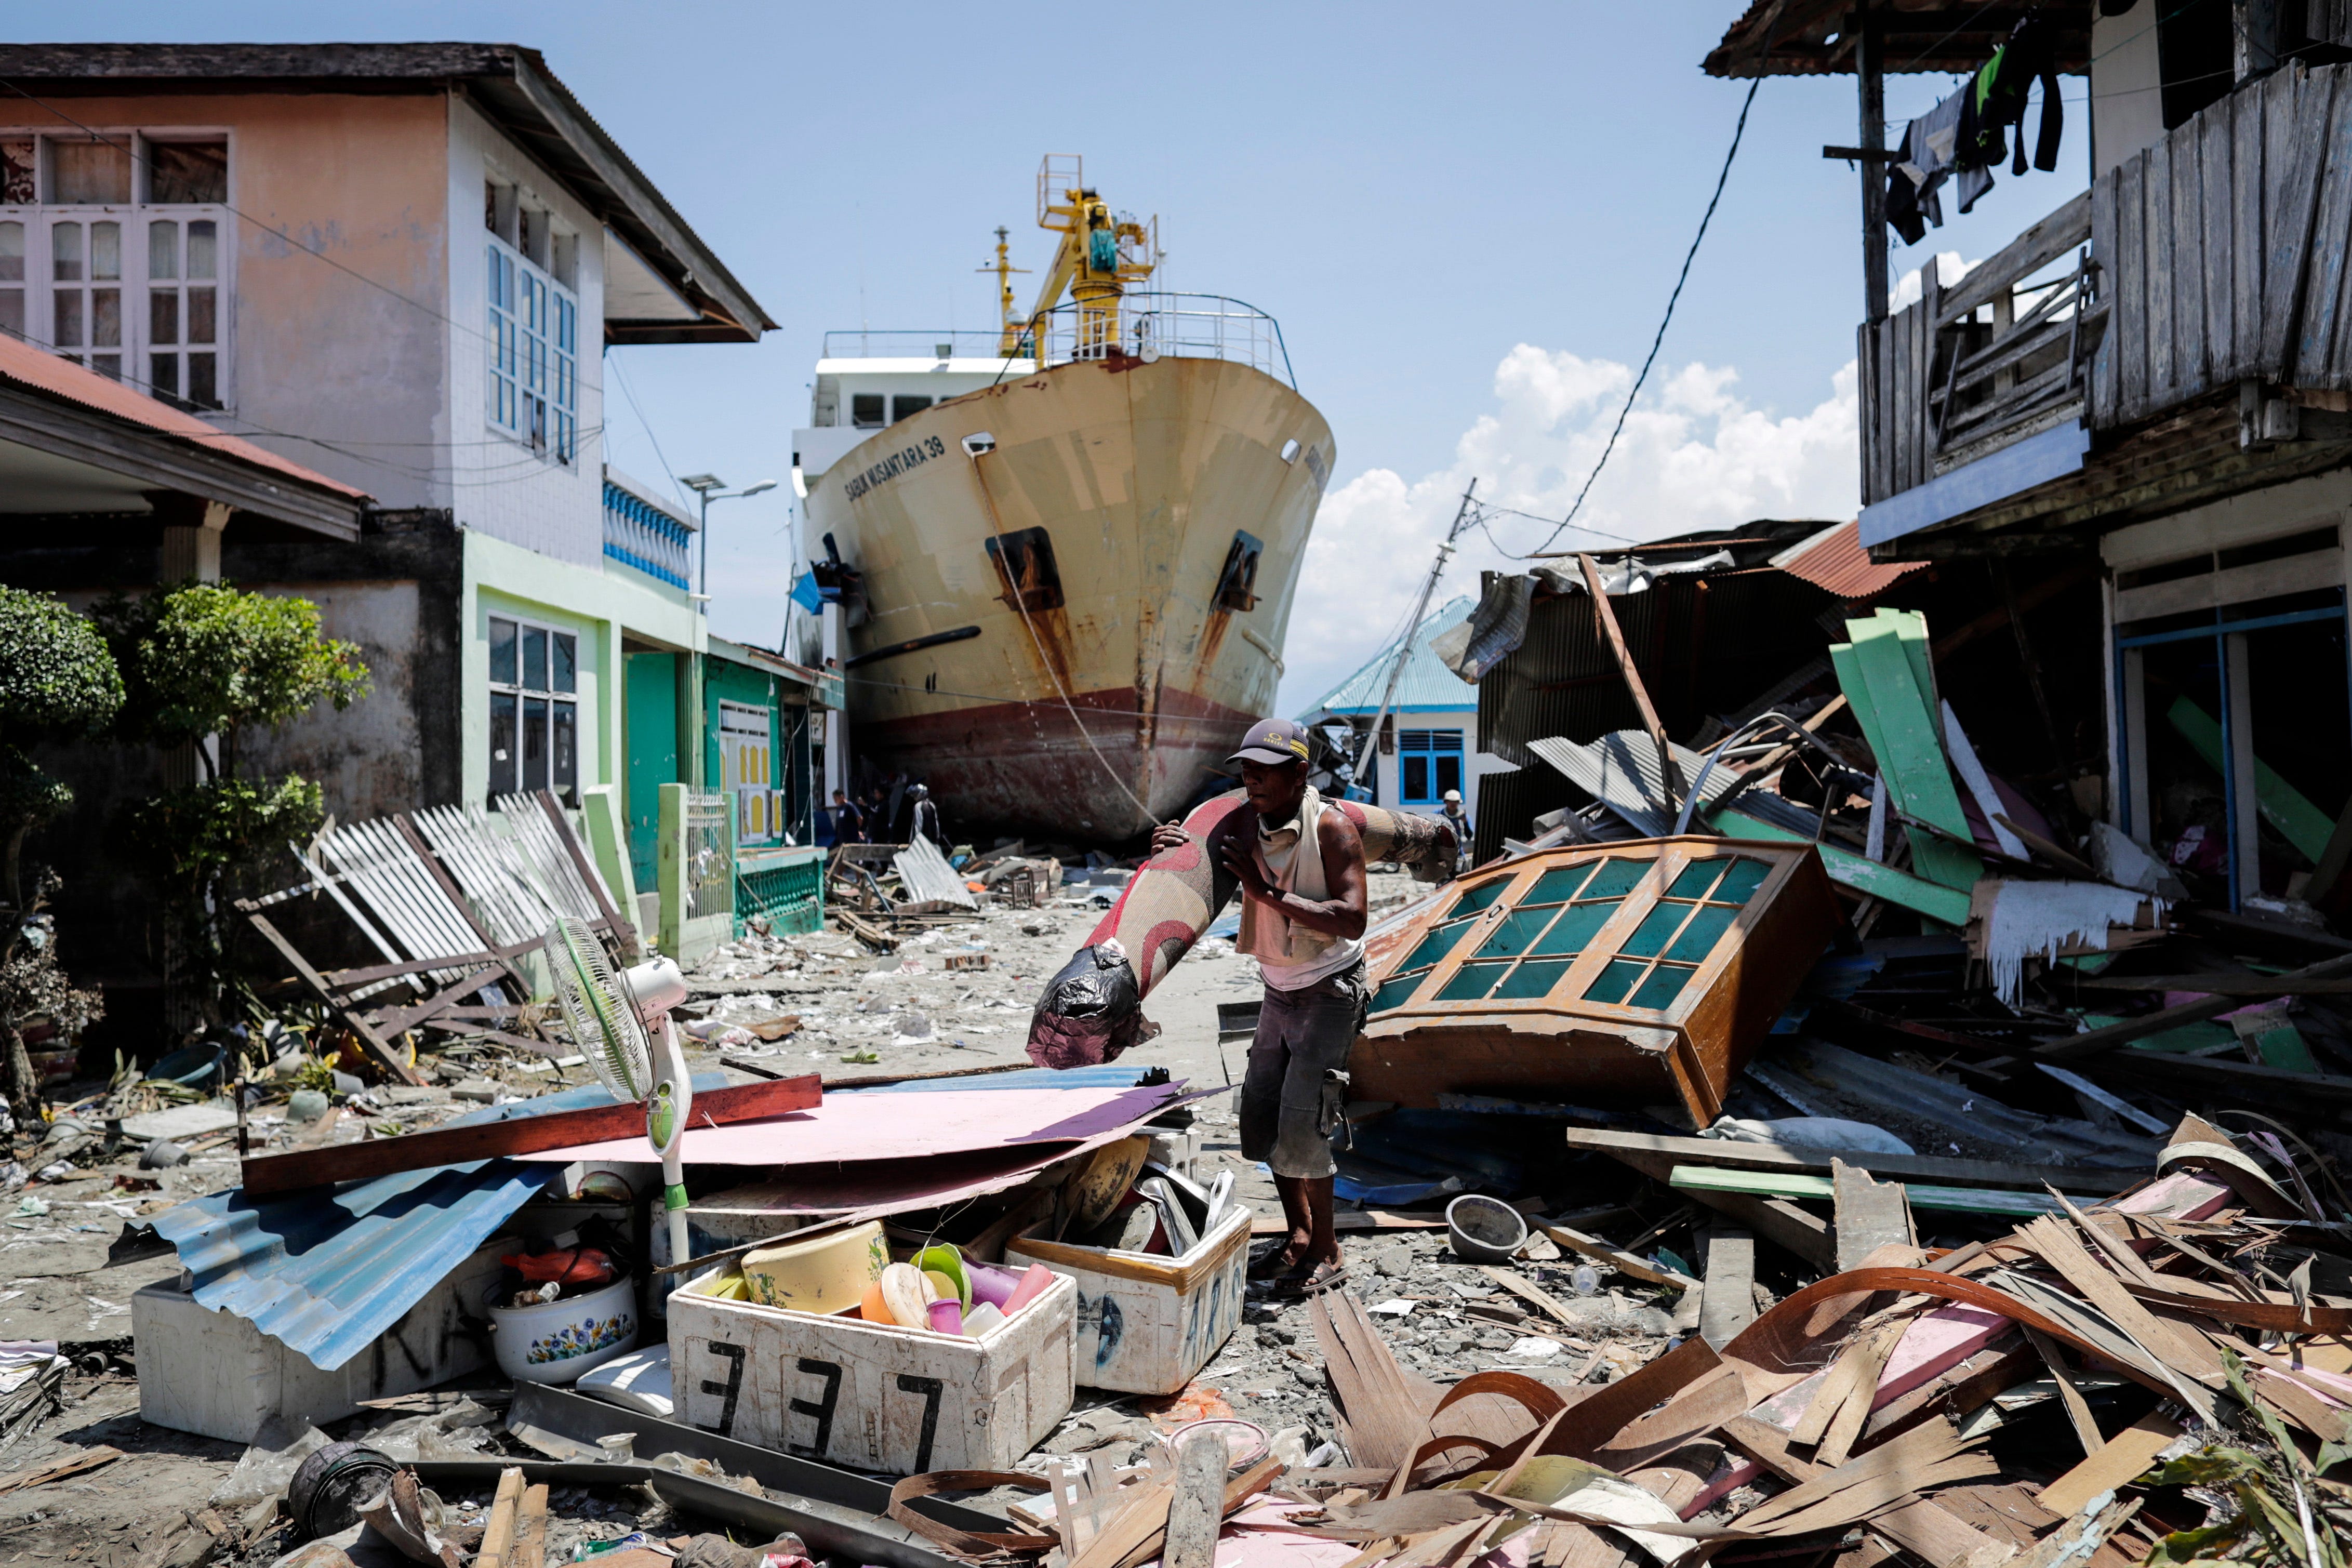 An Indonesian man carries his belongings past a stranded ship at a tsunami devastated area in Wani, Donggala, Central Sulawesi, Indonesia on Oct. 2, 2018. According to reports, at least 1,234 people have died after a series of powerful earthquakes hi